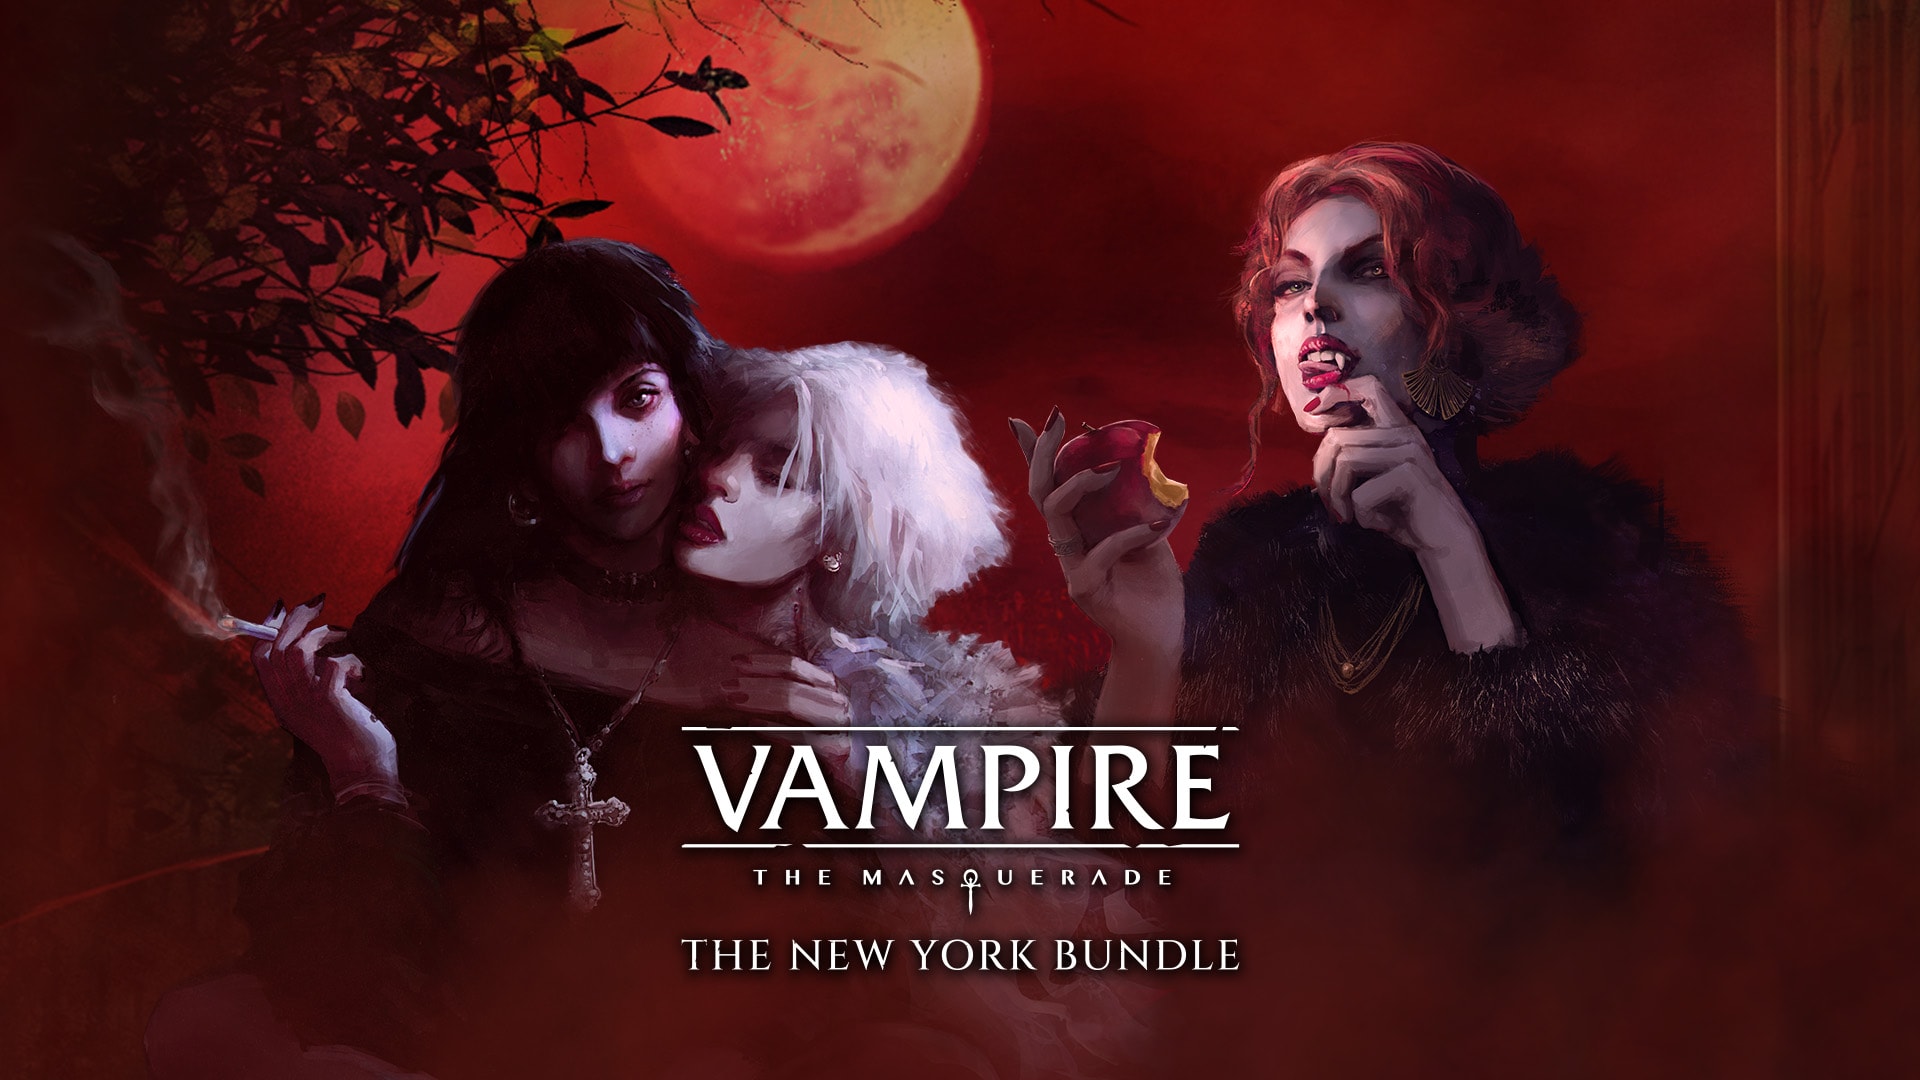 Vampire: The Masquerade - Coteries of New York Collector's Edition